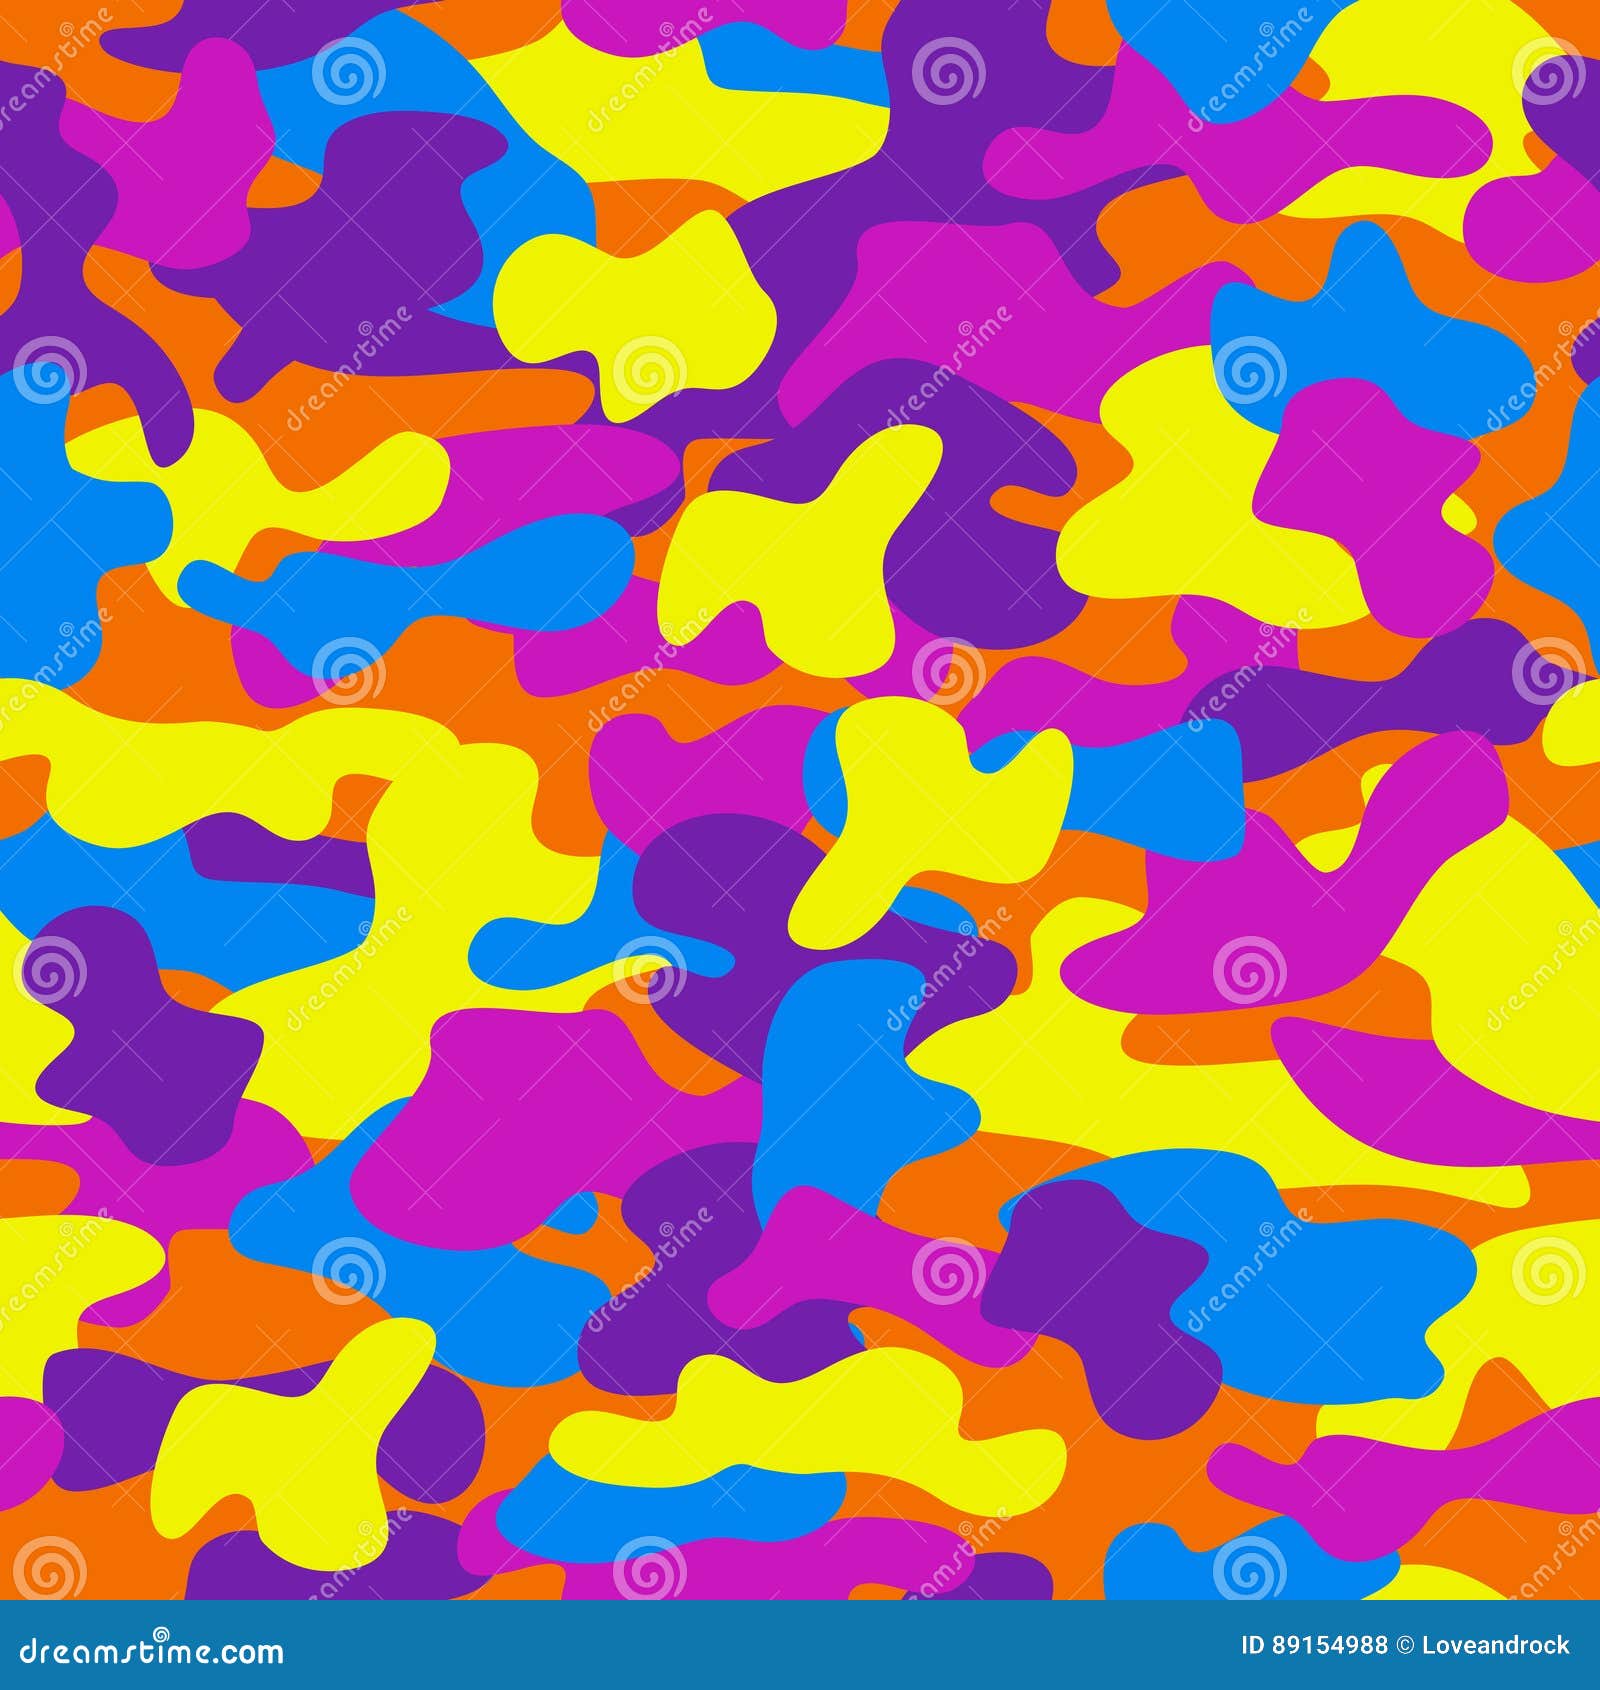 Camouflage Seamless Pattern in a Violet, Orange, Blue, Yellow and Deep ...